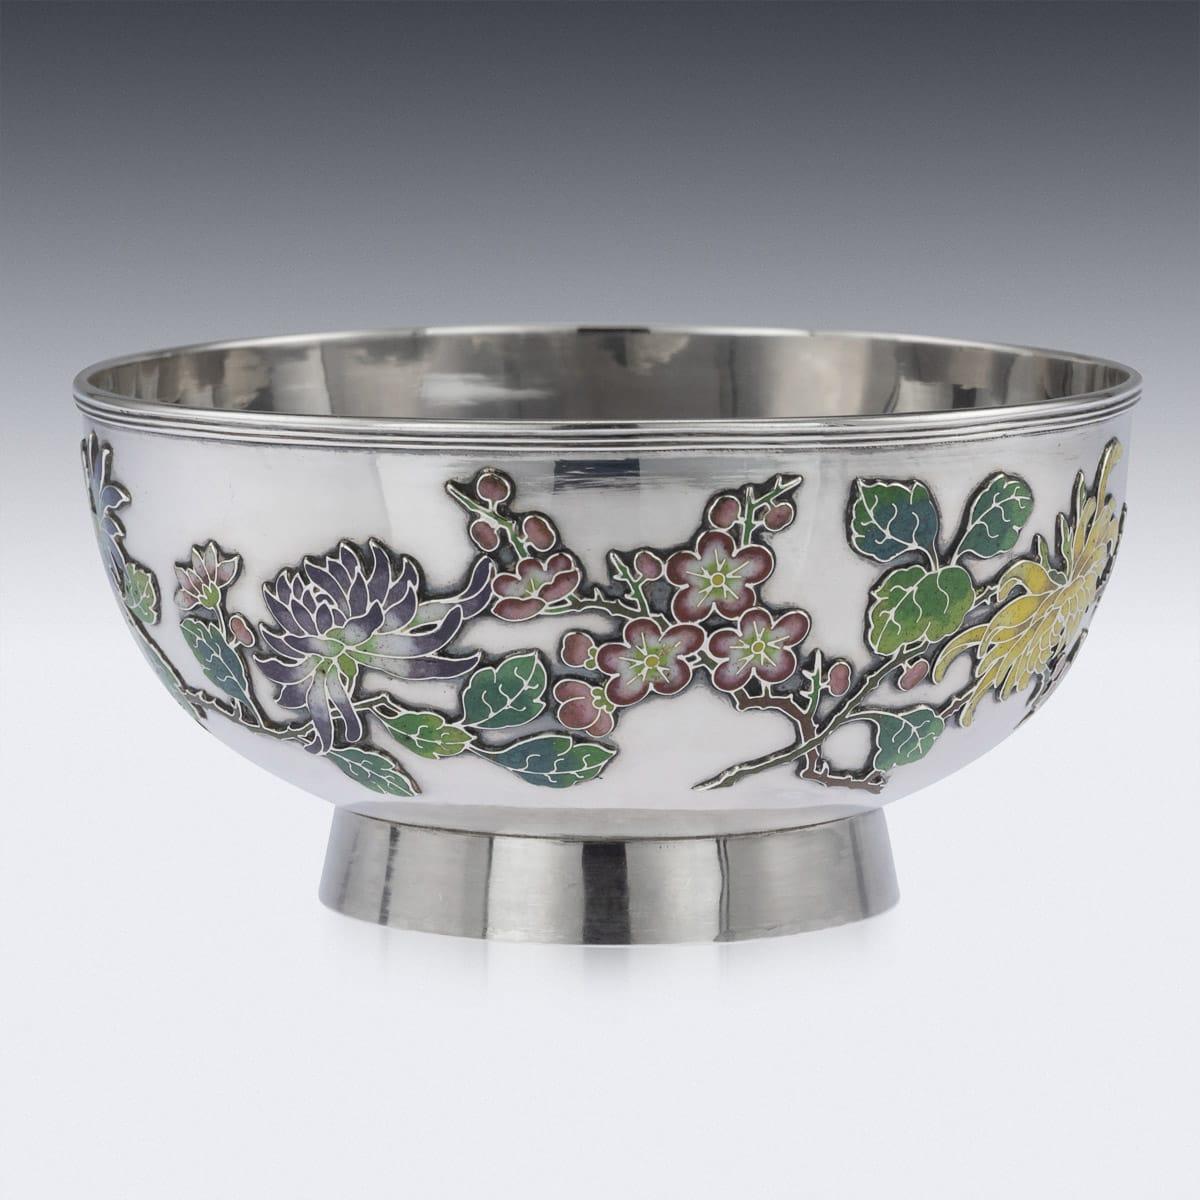 19th Century Rare Chinese Export Solid Silver & Enamel Bowl, Wo Kwong circa 1890 In Good Condition For Sale In Royal Tunbridge Wells, Kent